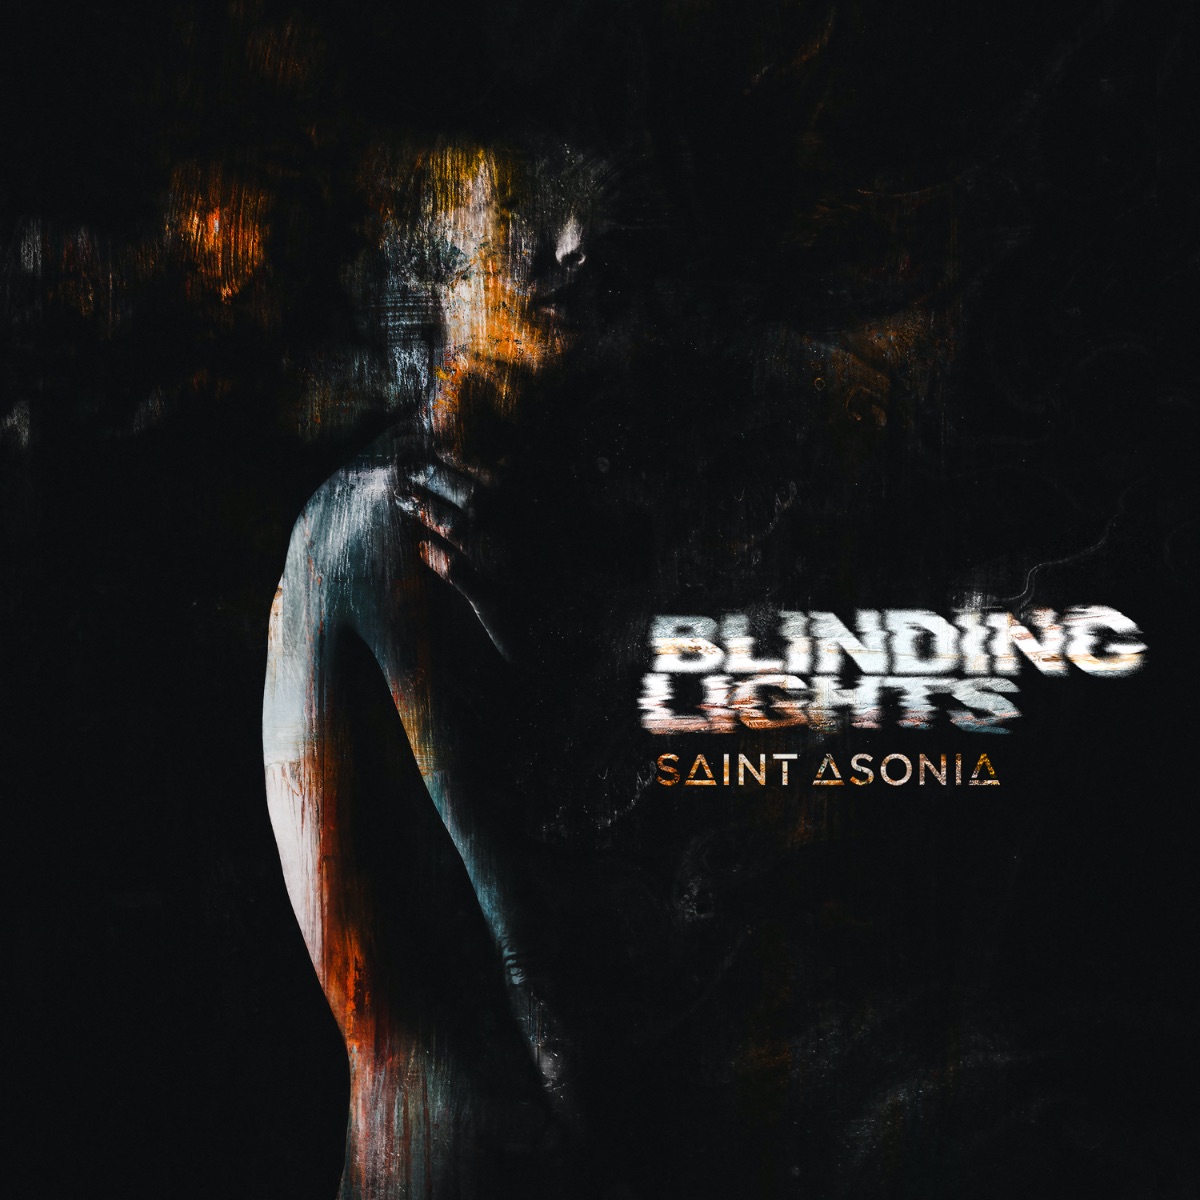 Saint Asonia Cover The Weeknd's "Blinding Lights"